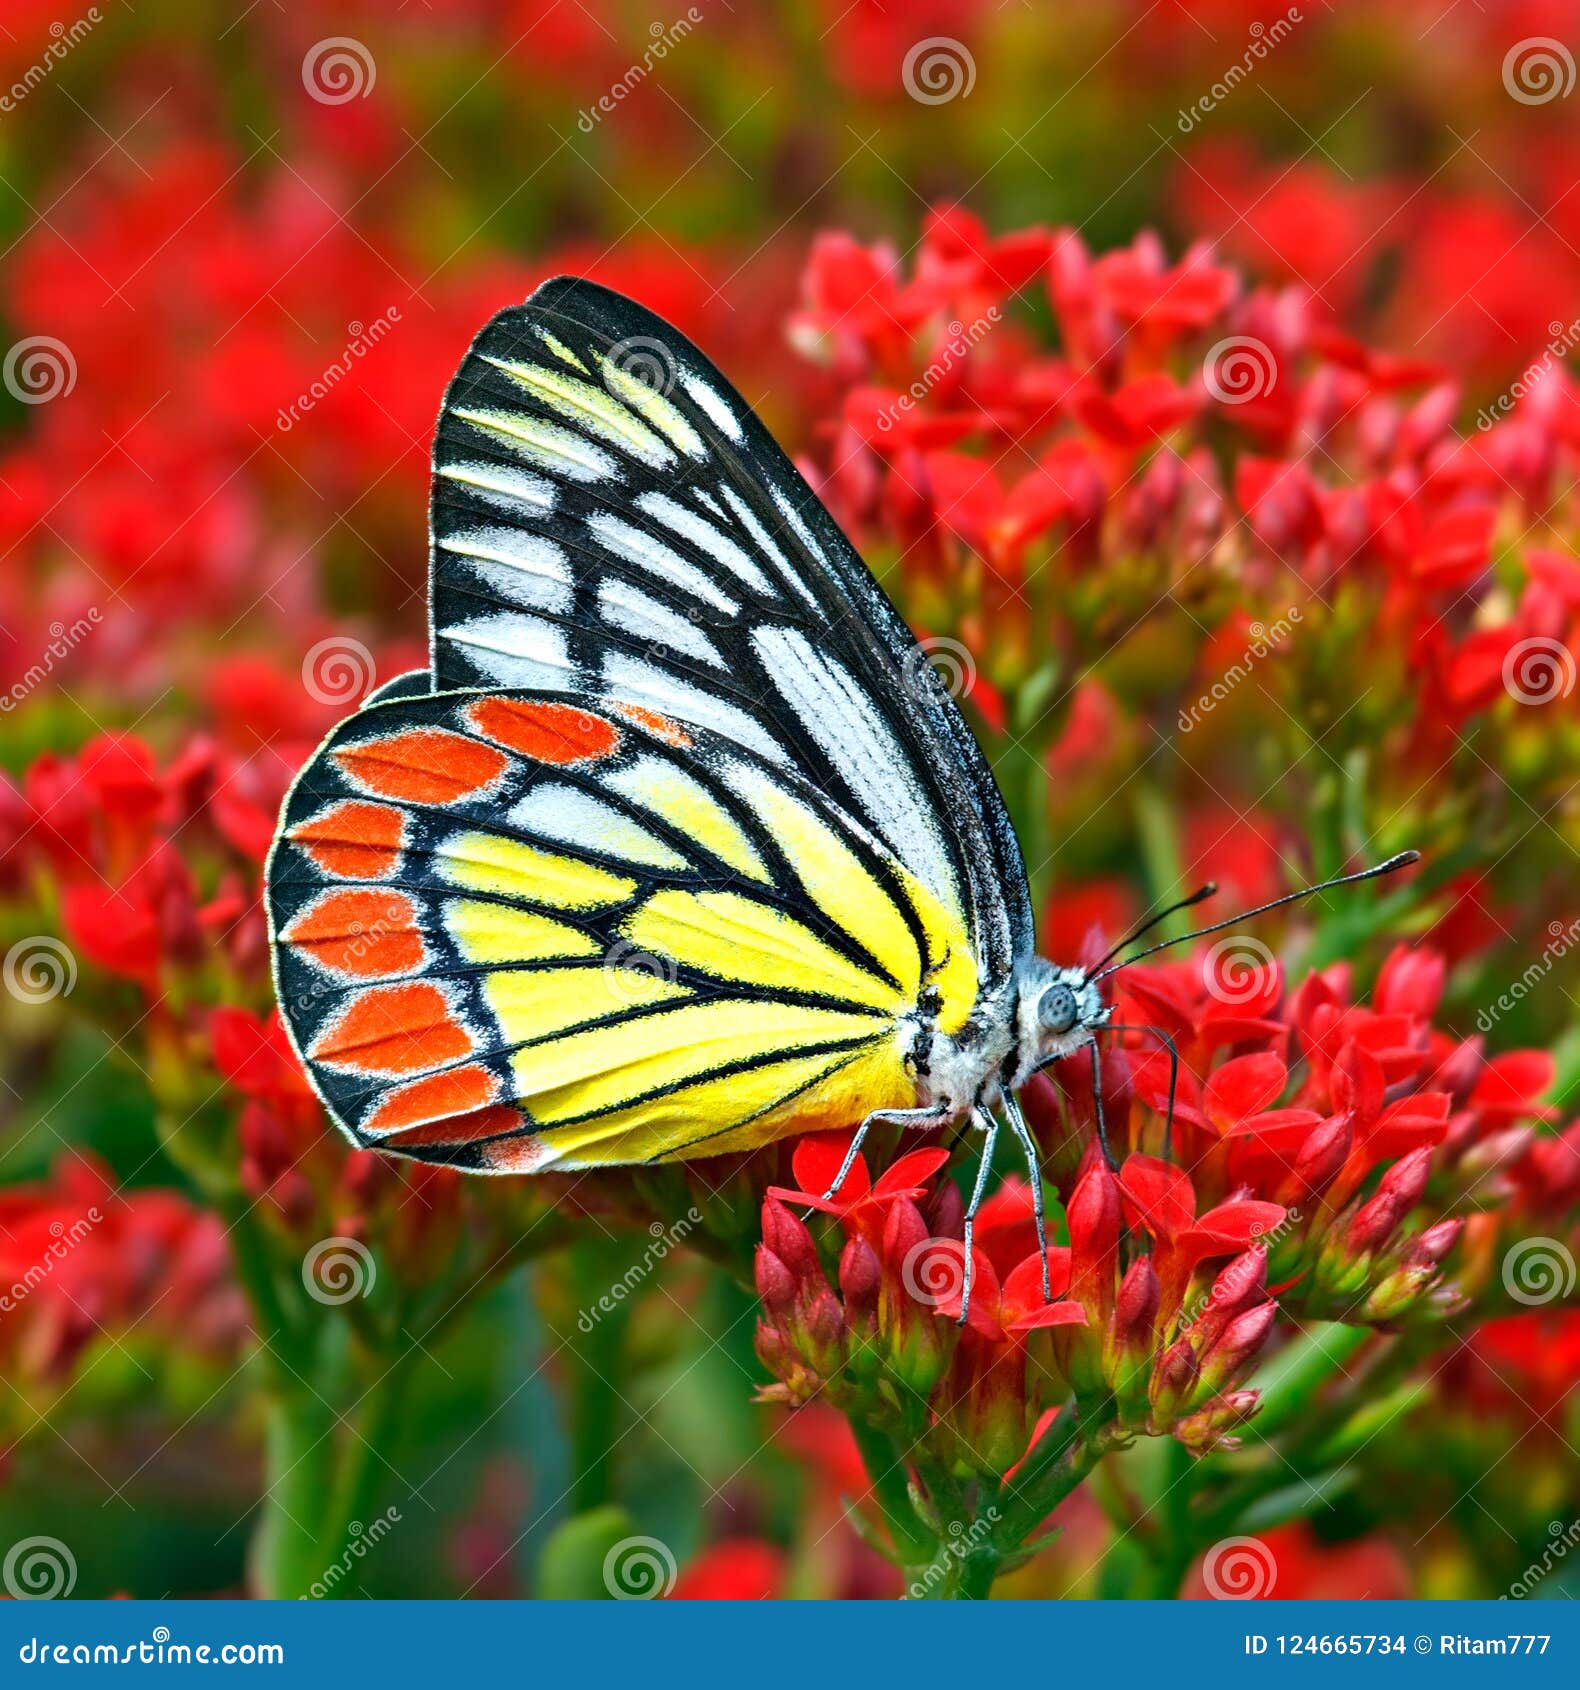 butterfly common jezebel or delias eucharis among red flowers